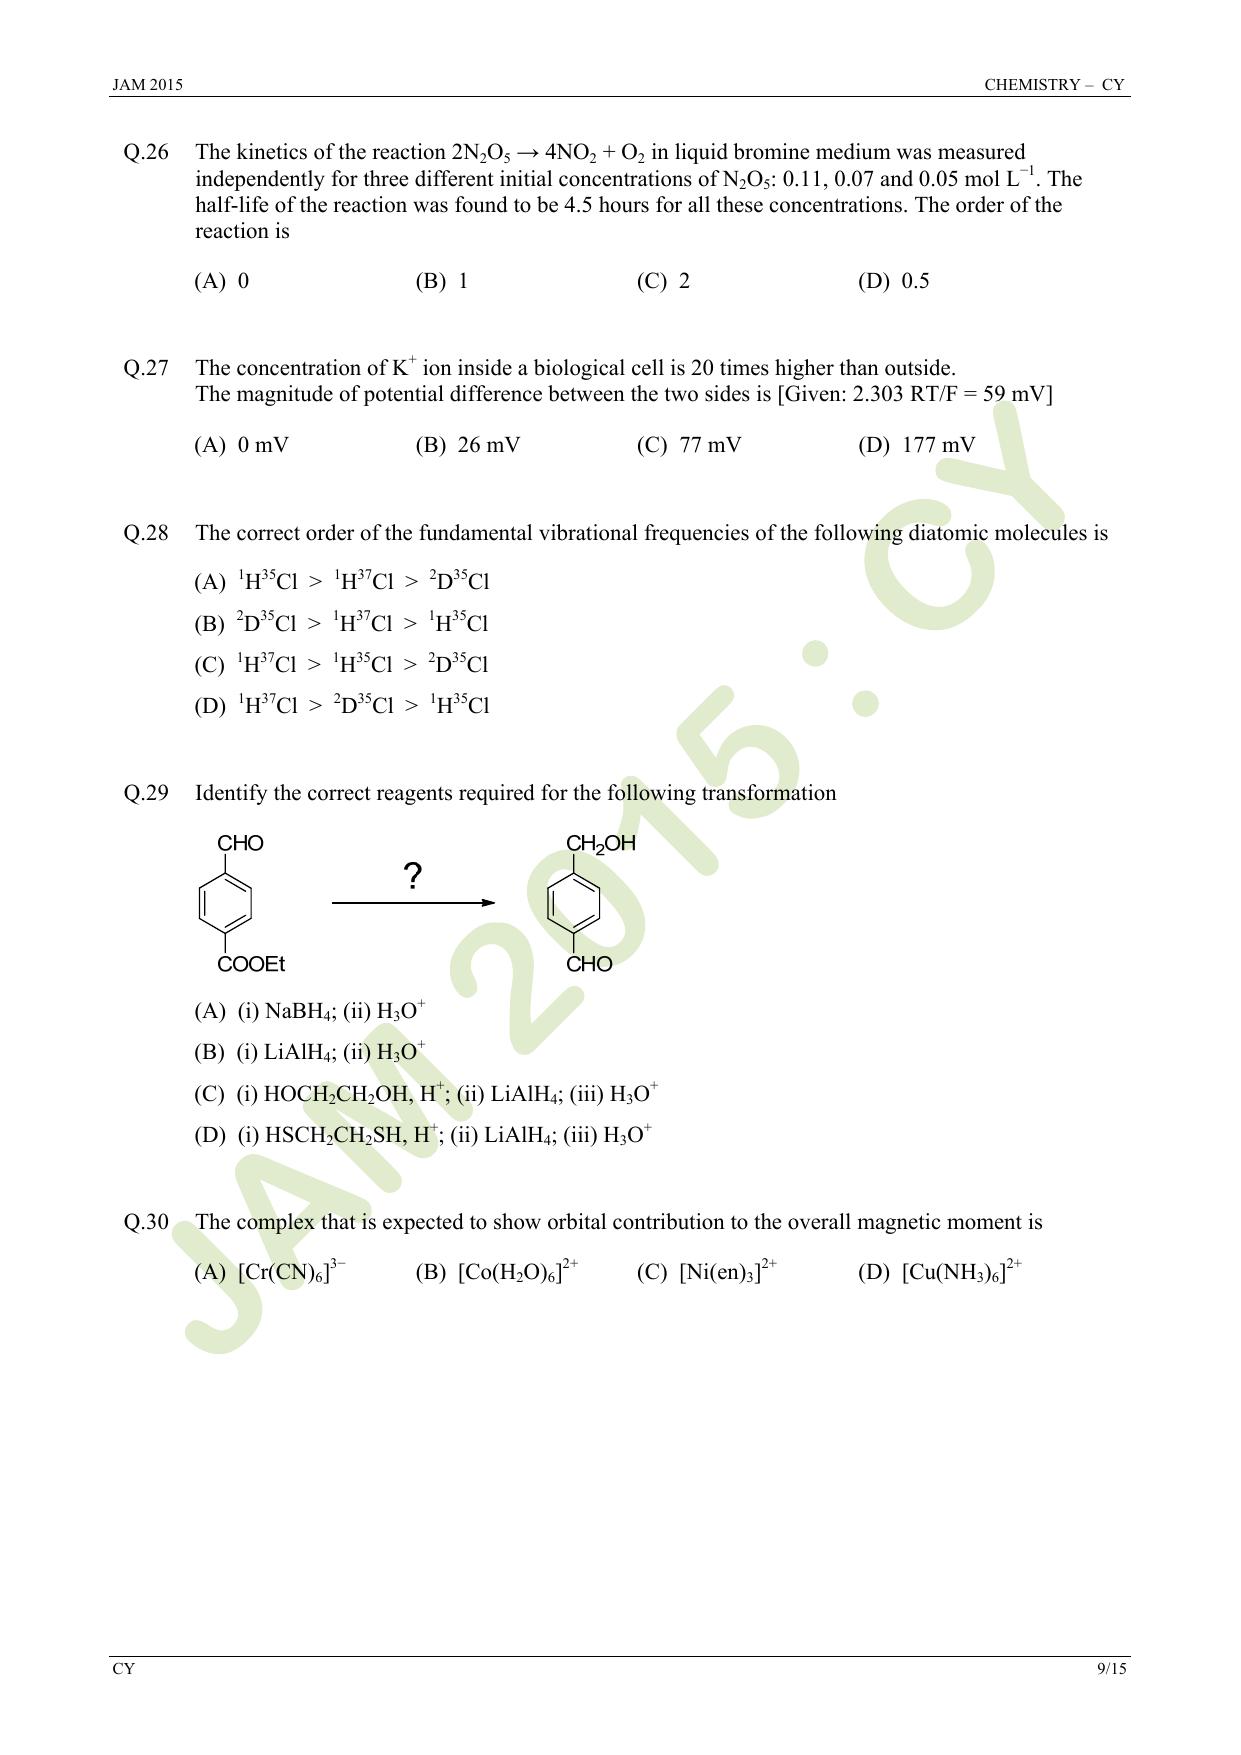 JAM 2015: CY Question Paper - Page 9